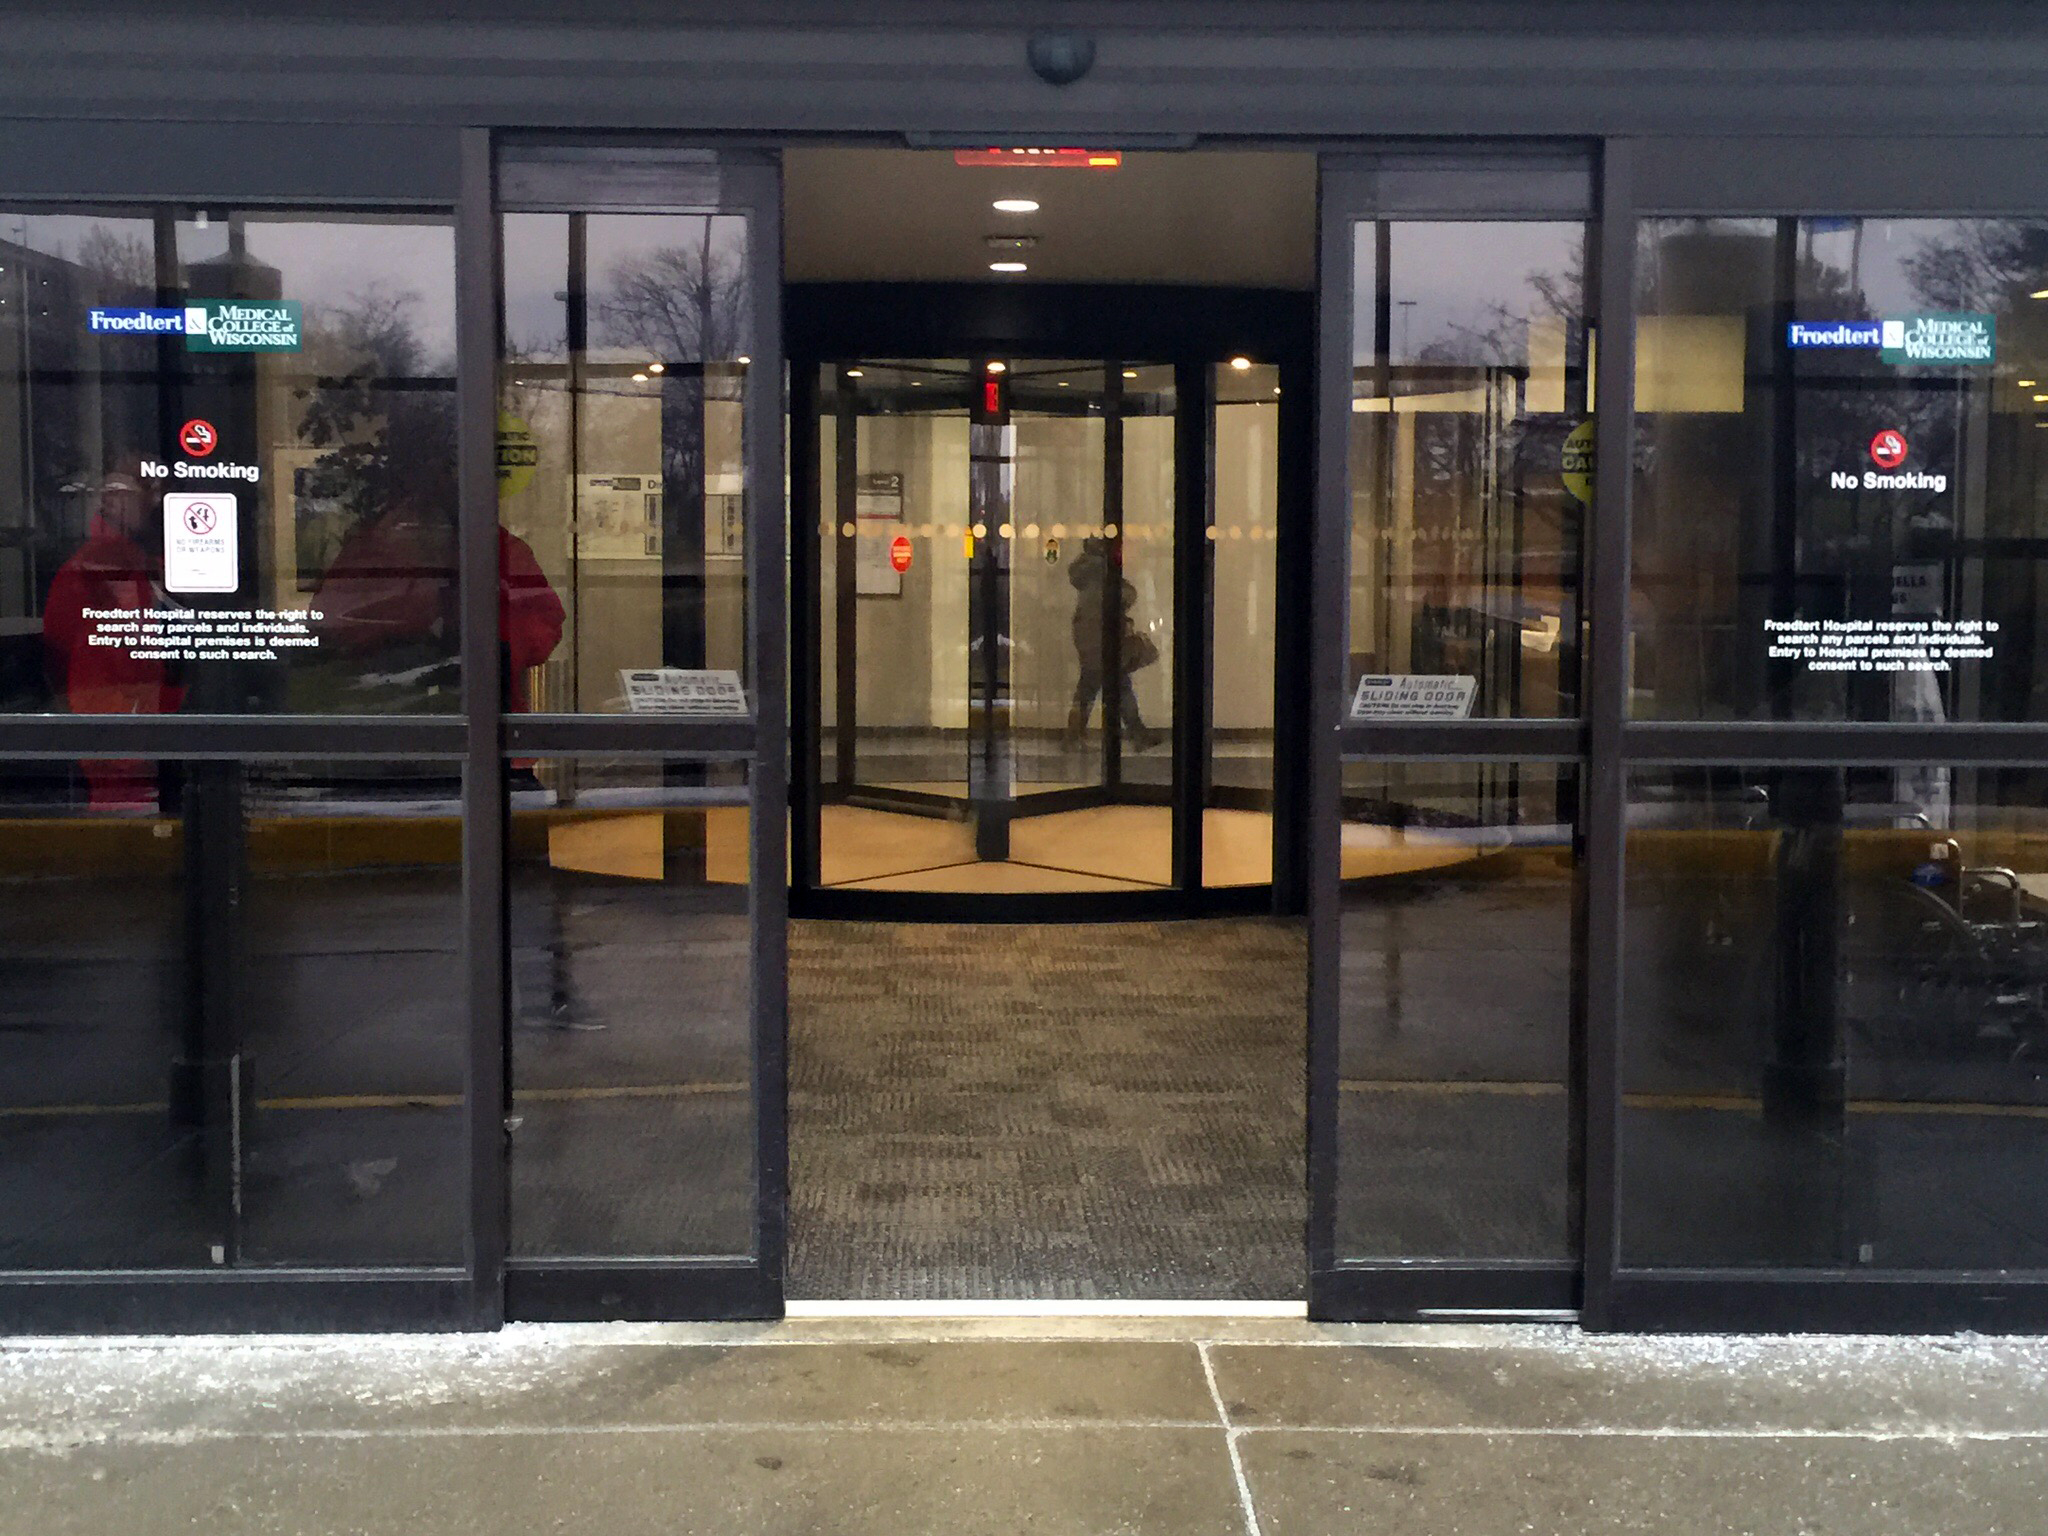 Wisconsin Hospitals Use Boon Edam Revolving Doors in Special, Double ...